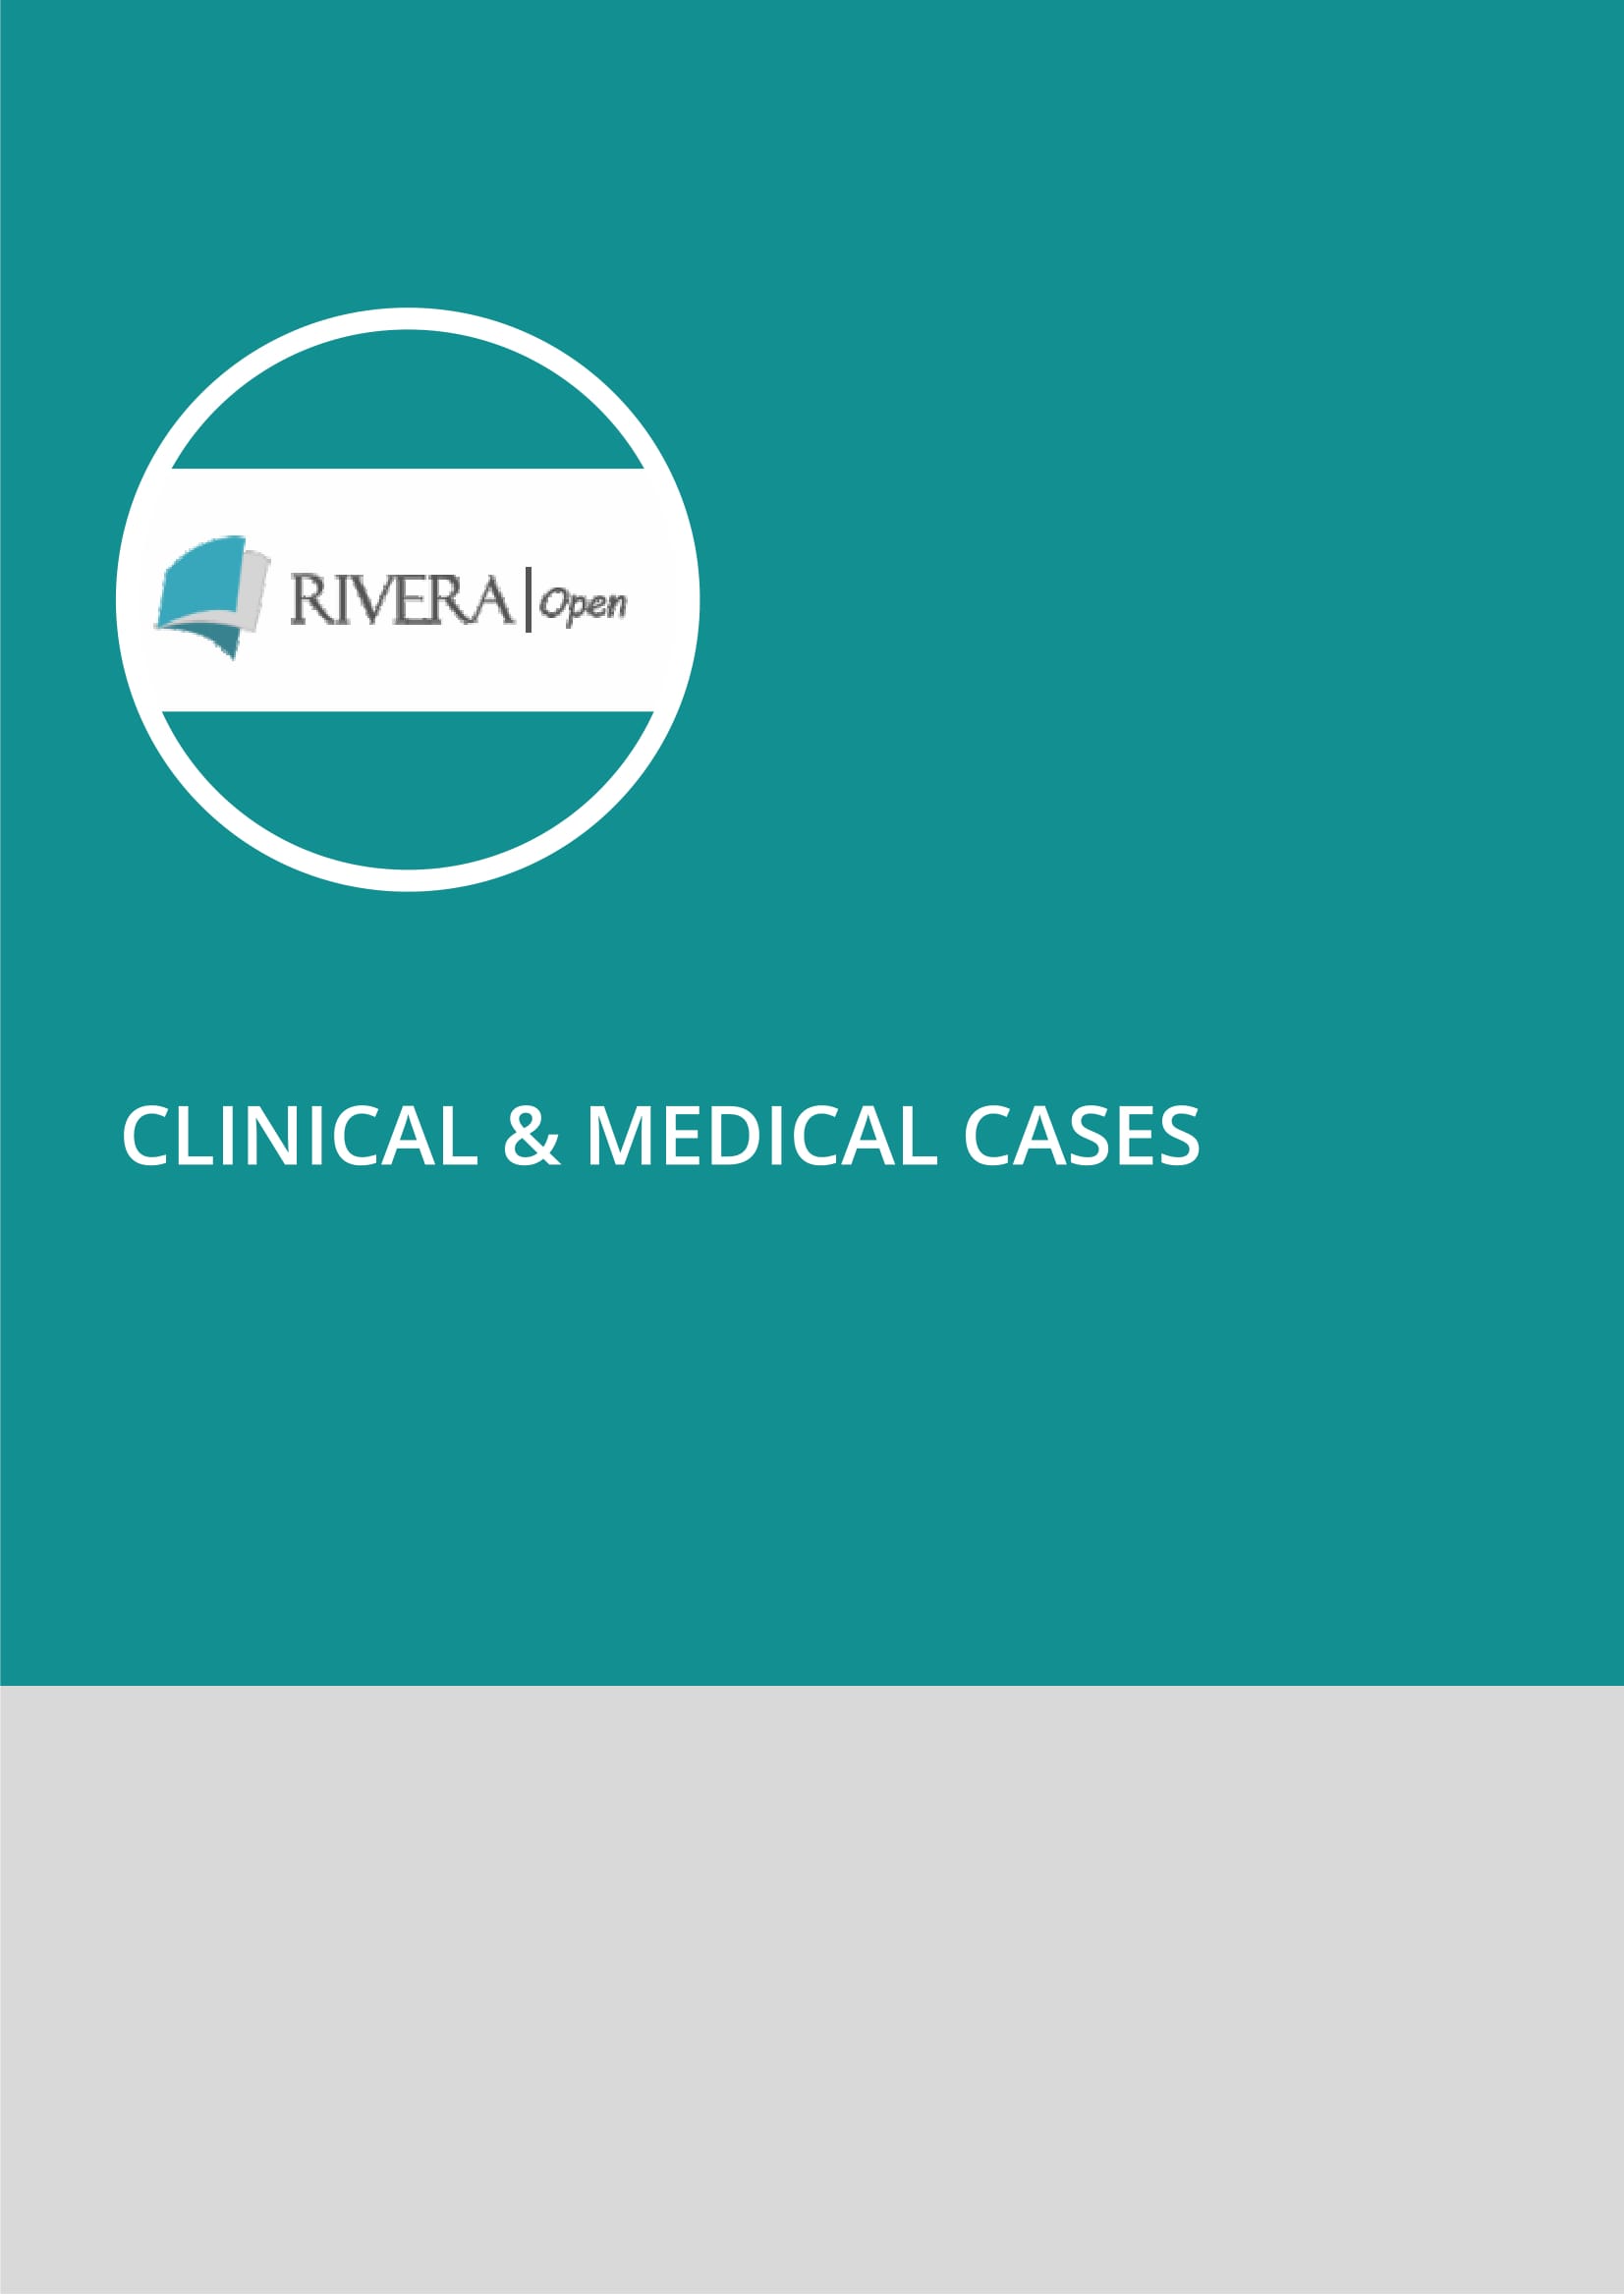 Clinical & Medical Cases